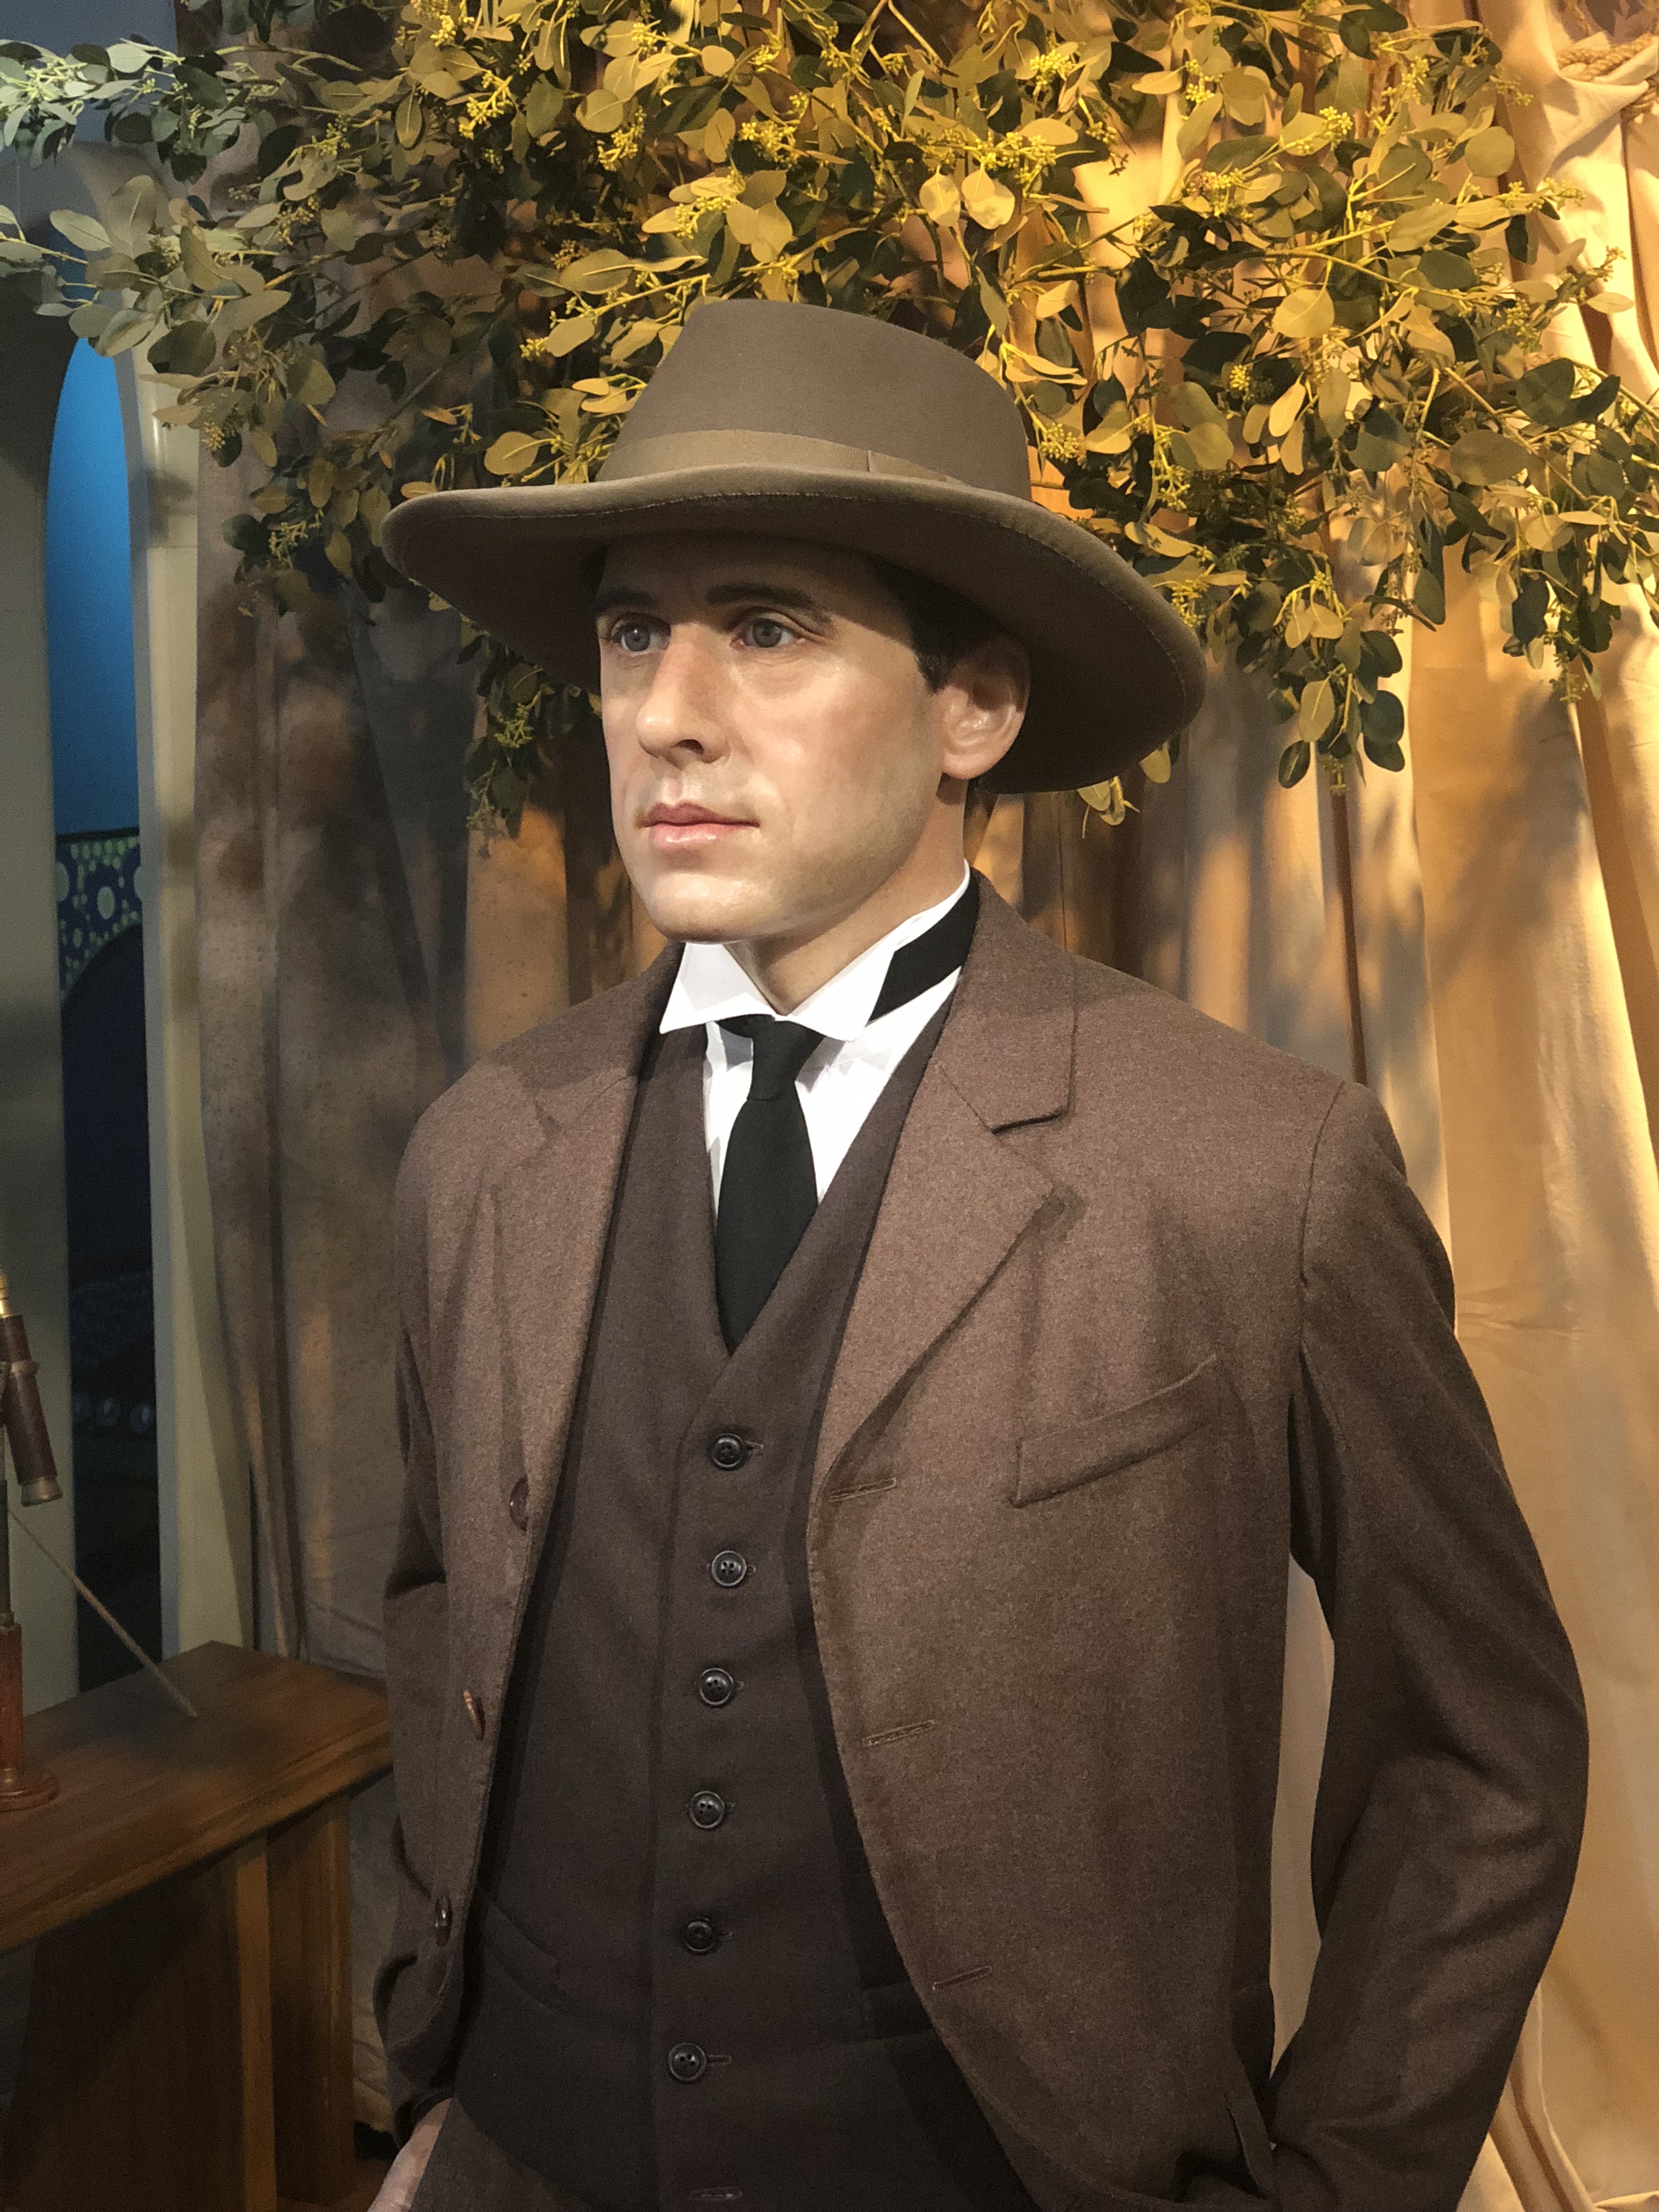 banjo paterson wax work in brown hat